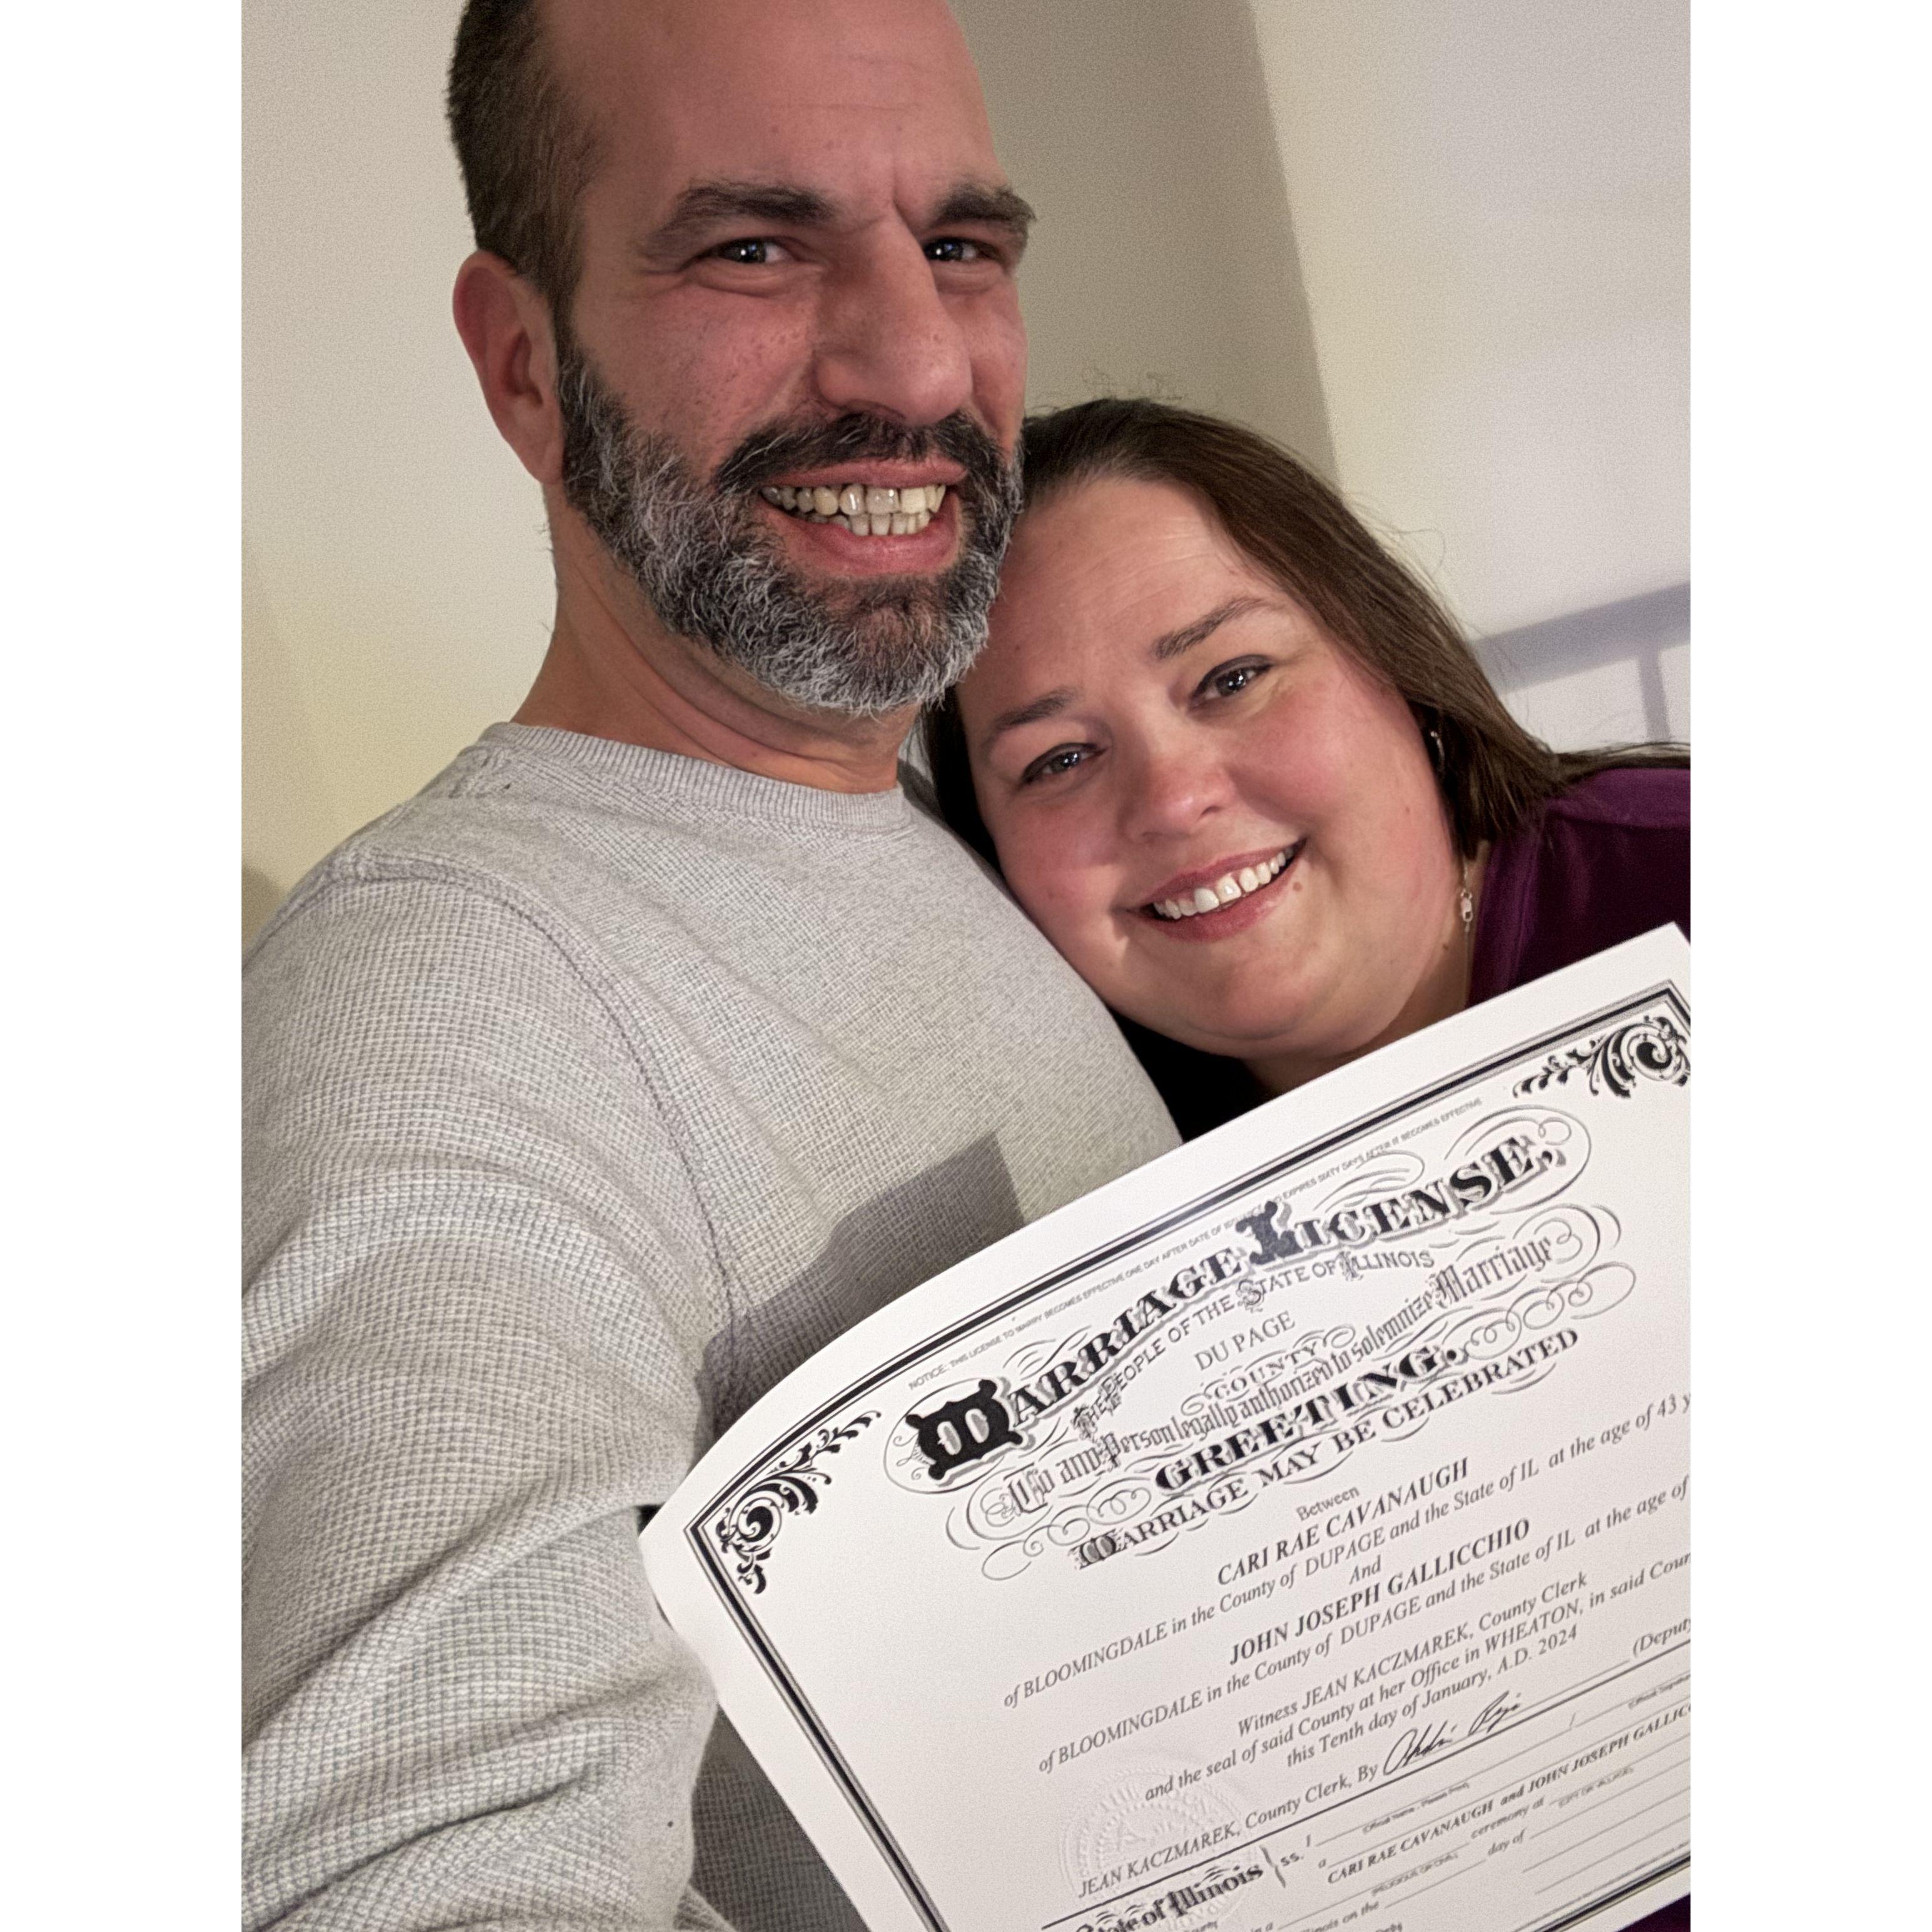 We got our marriage license!!